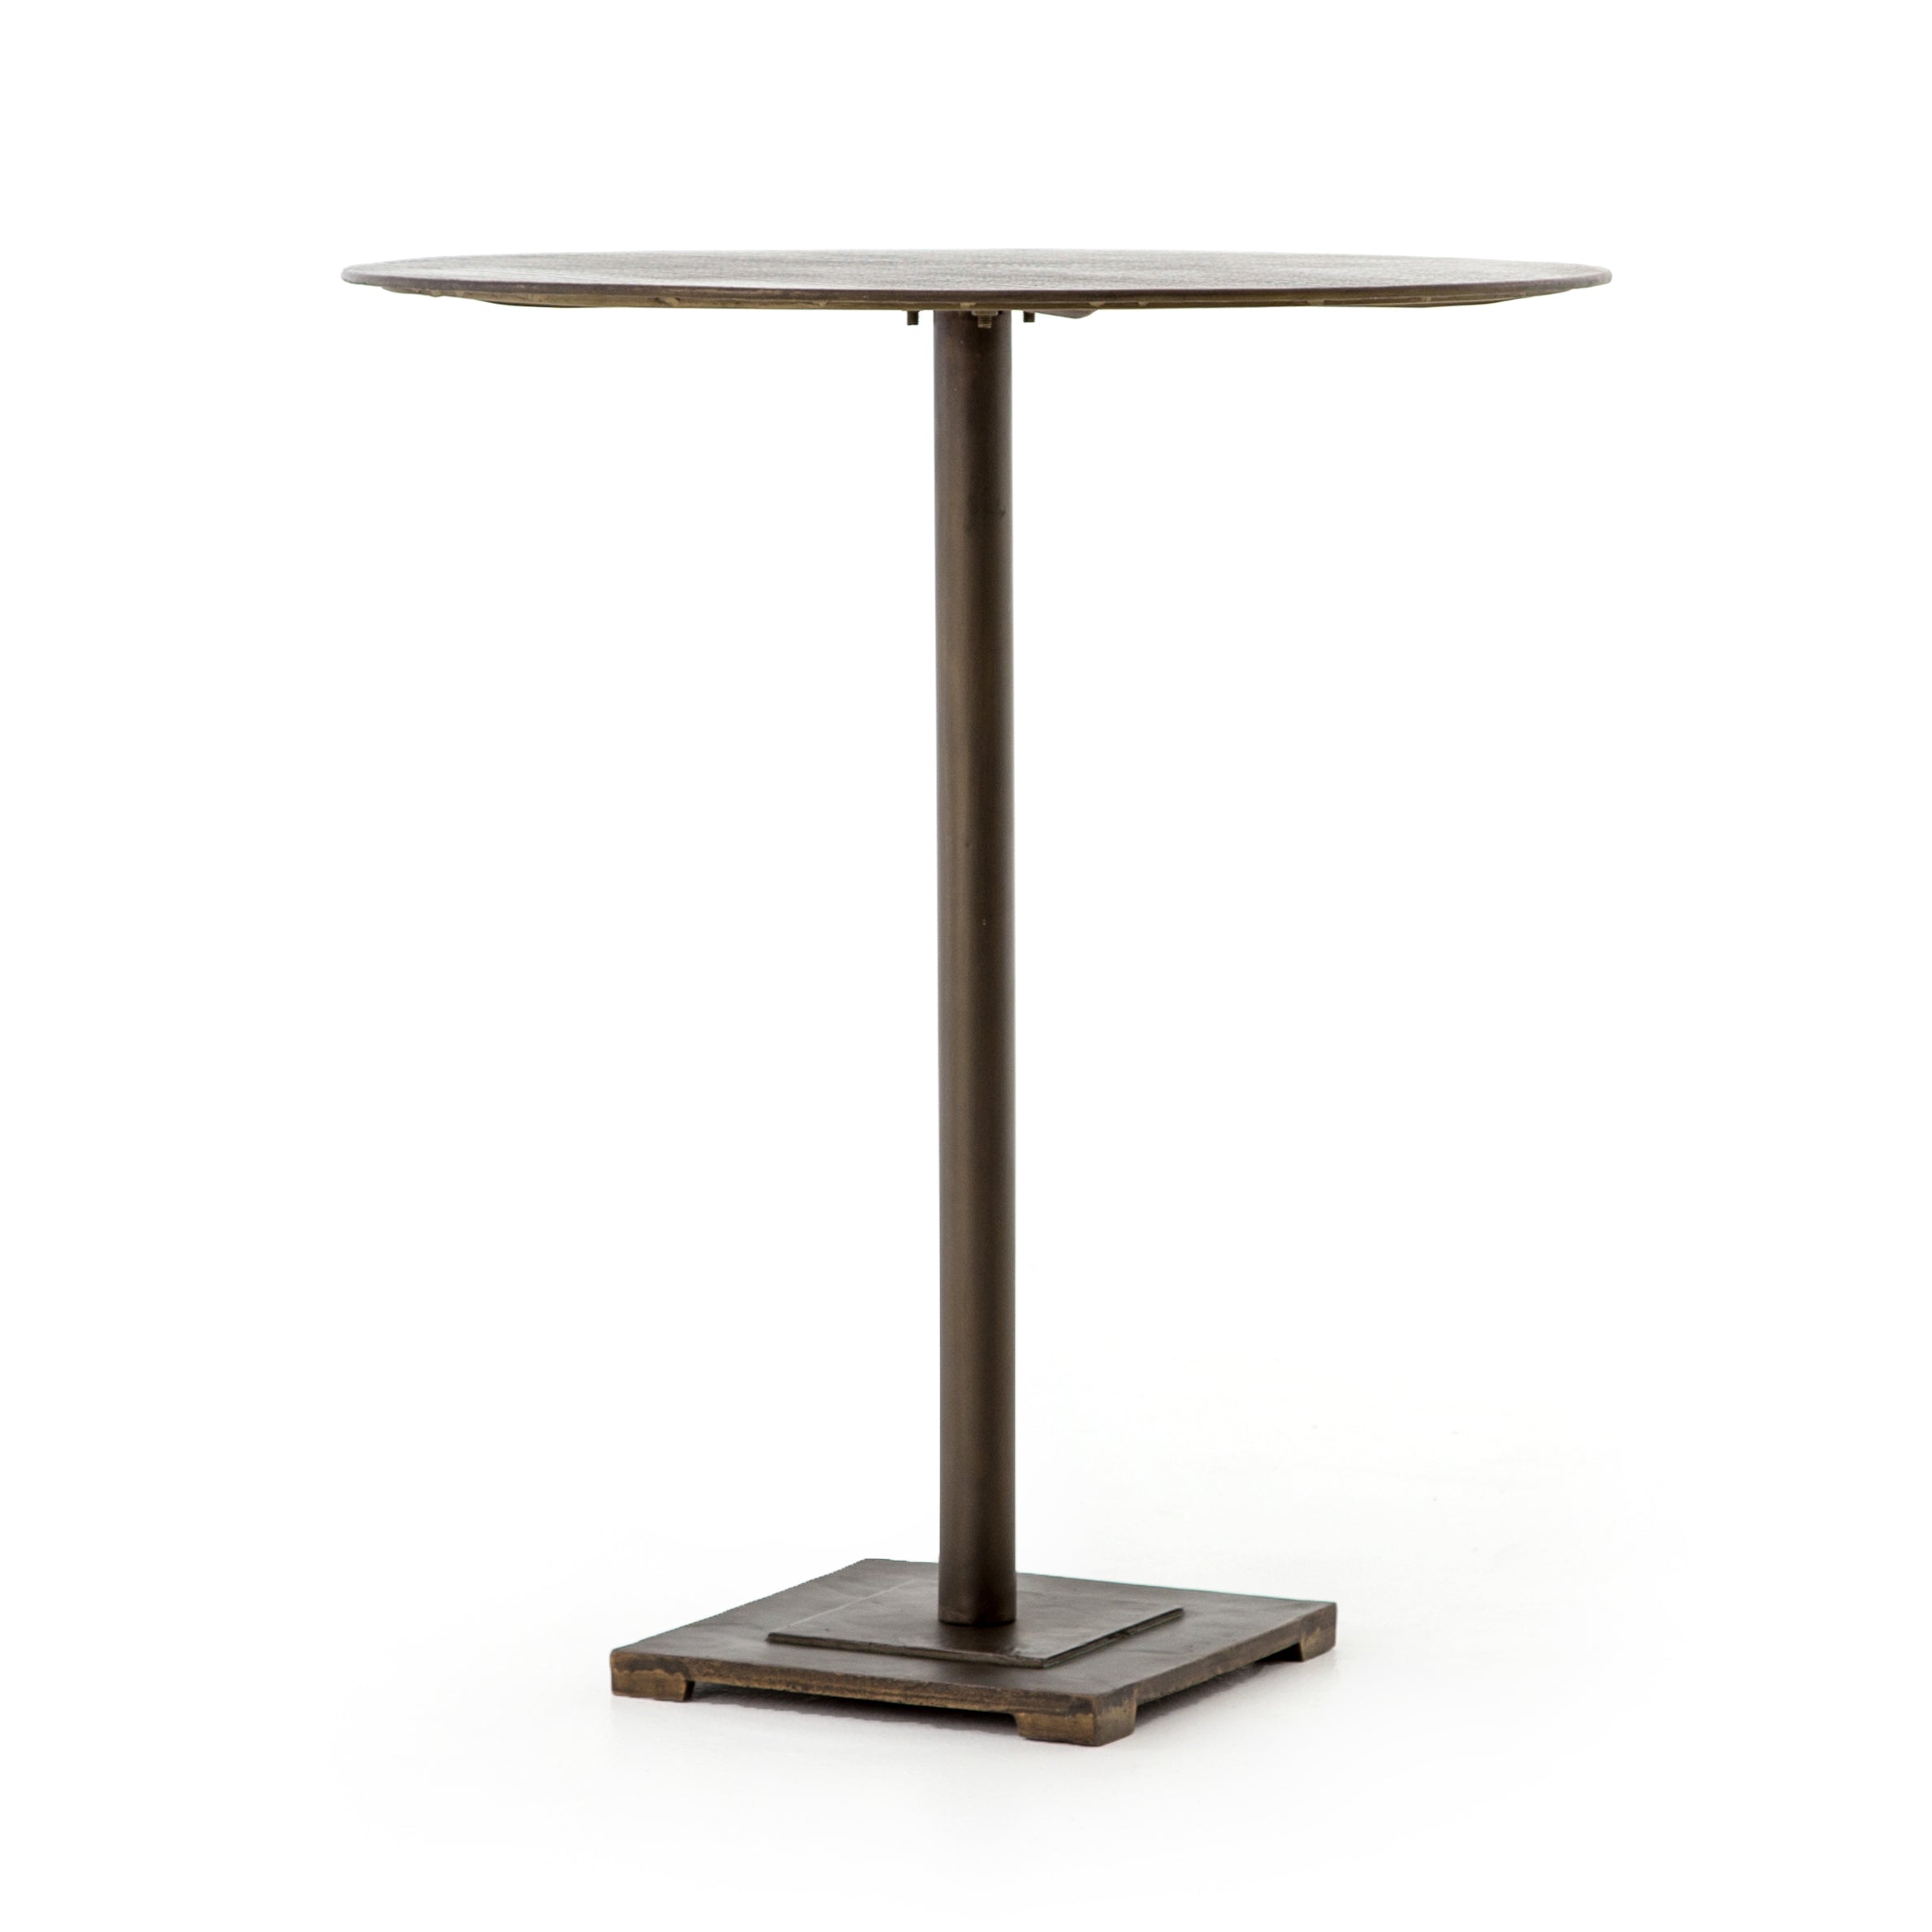 We love the antique brass finish of this Fannin Bar + Counter Table. The acid-etched top pattern sets an industrial pace for this pedestal-style bistro table, perfect for any lounge or bar area.   Colors: Aged Brass, Acid Etched Aged Brass Materials: Iron